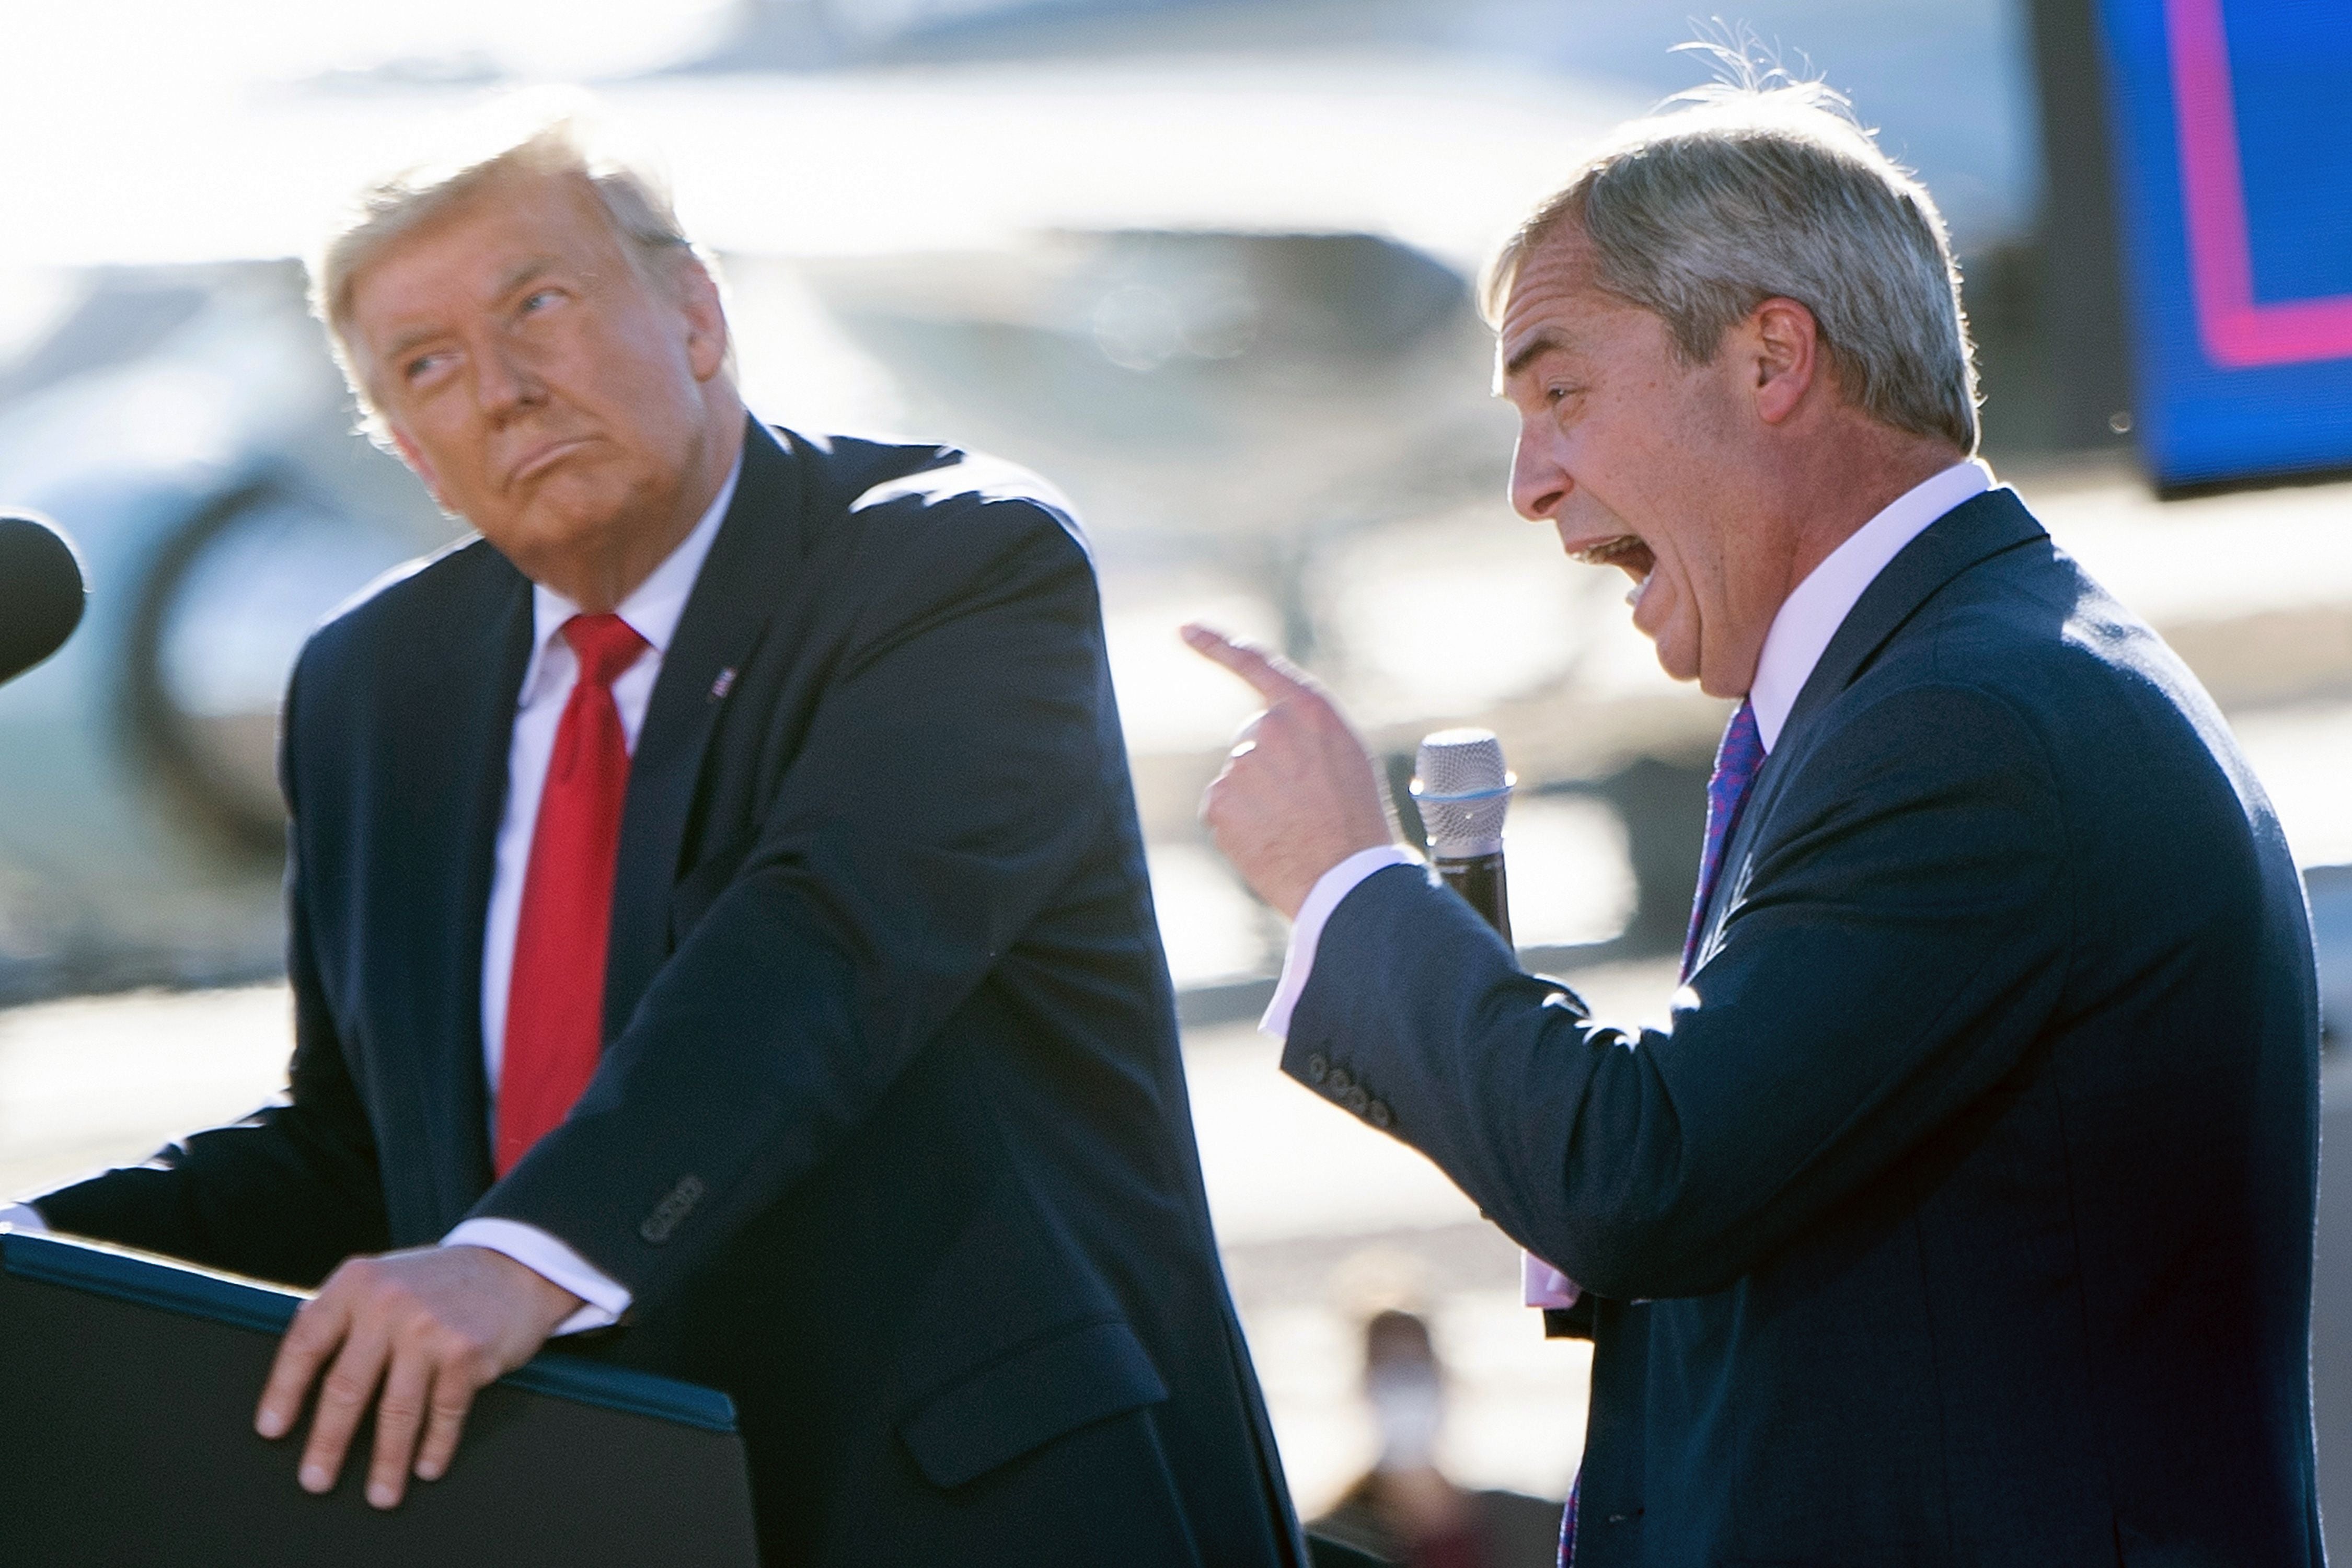 Farage and Donald Trump may be lockdown sceptics, but their followers are not